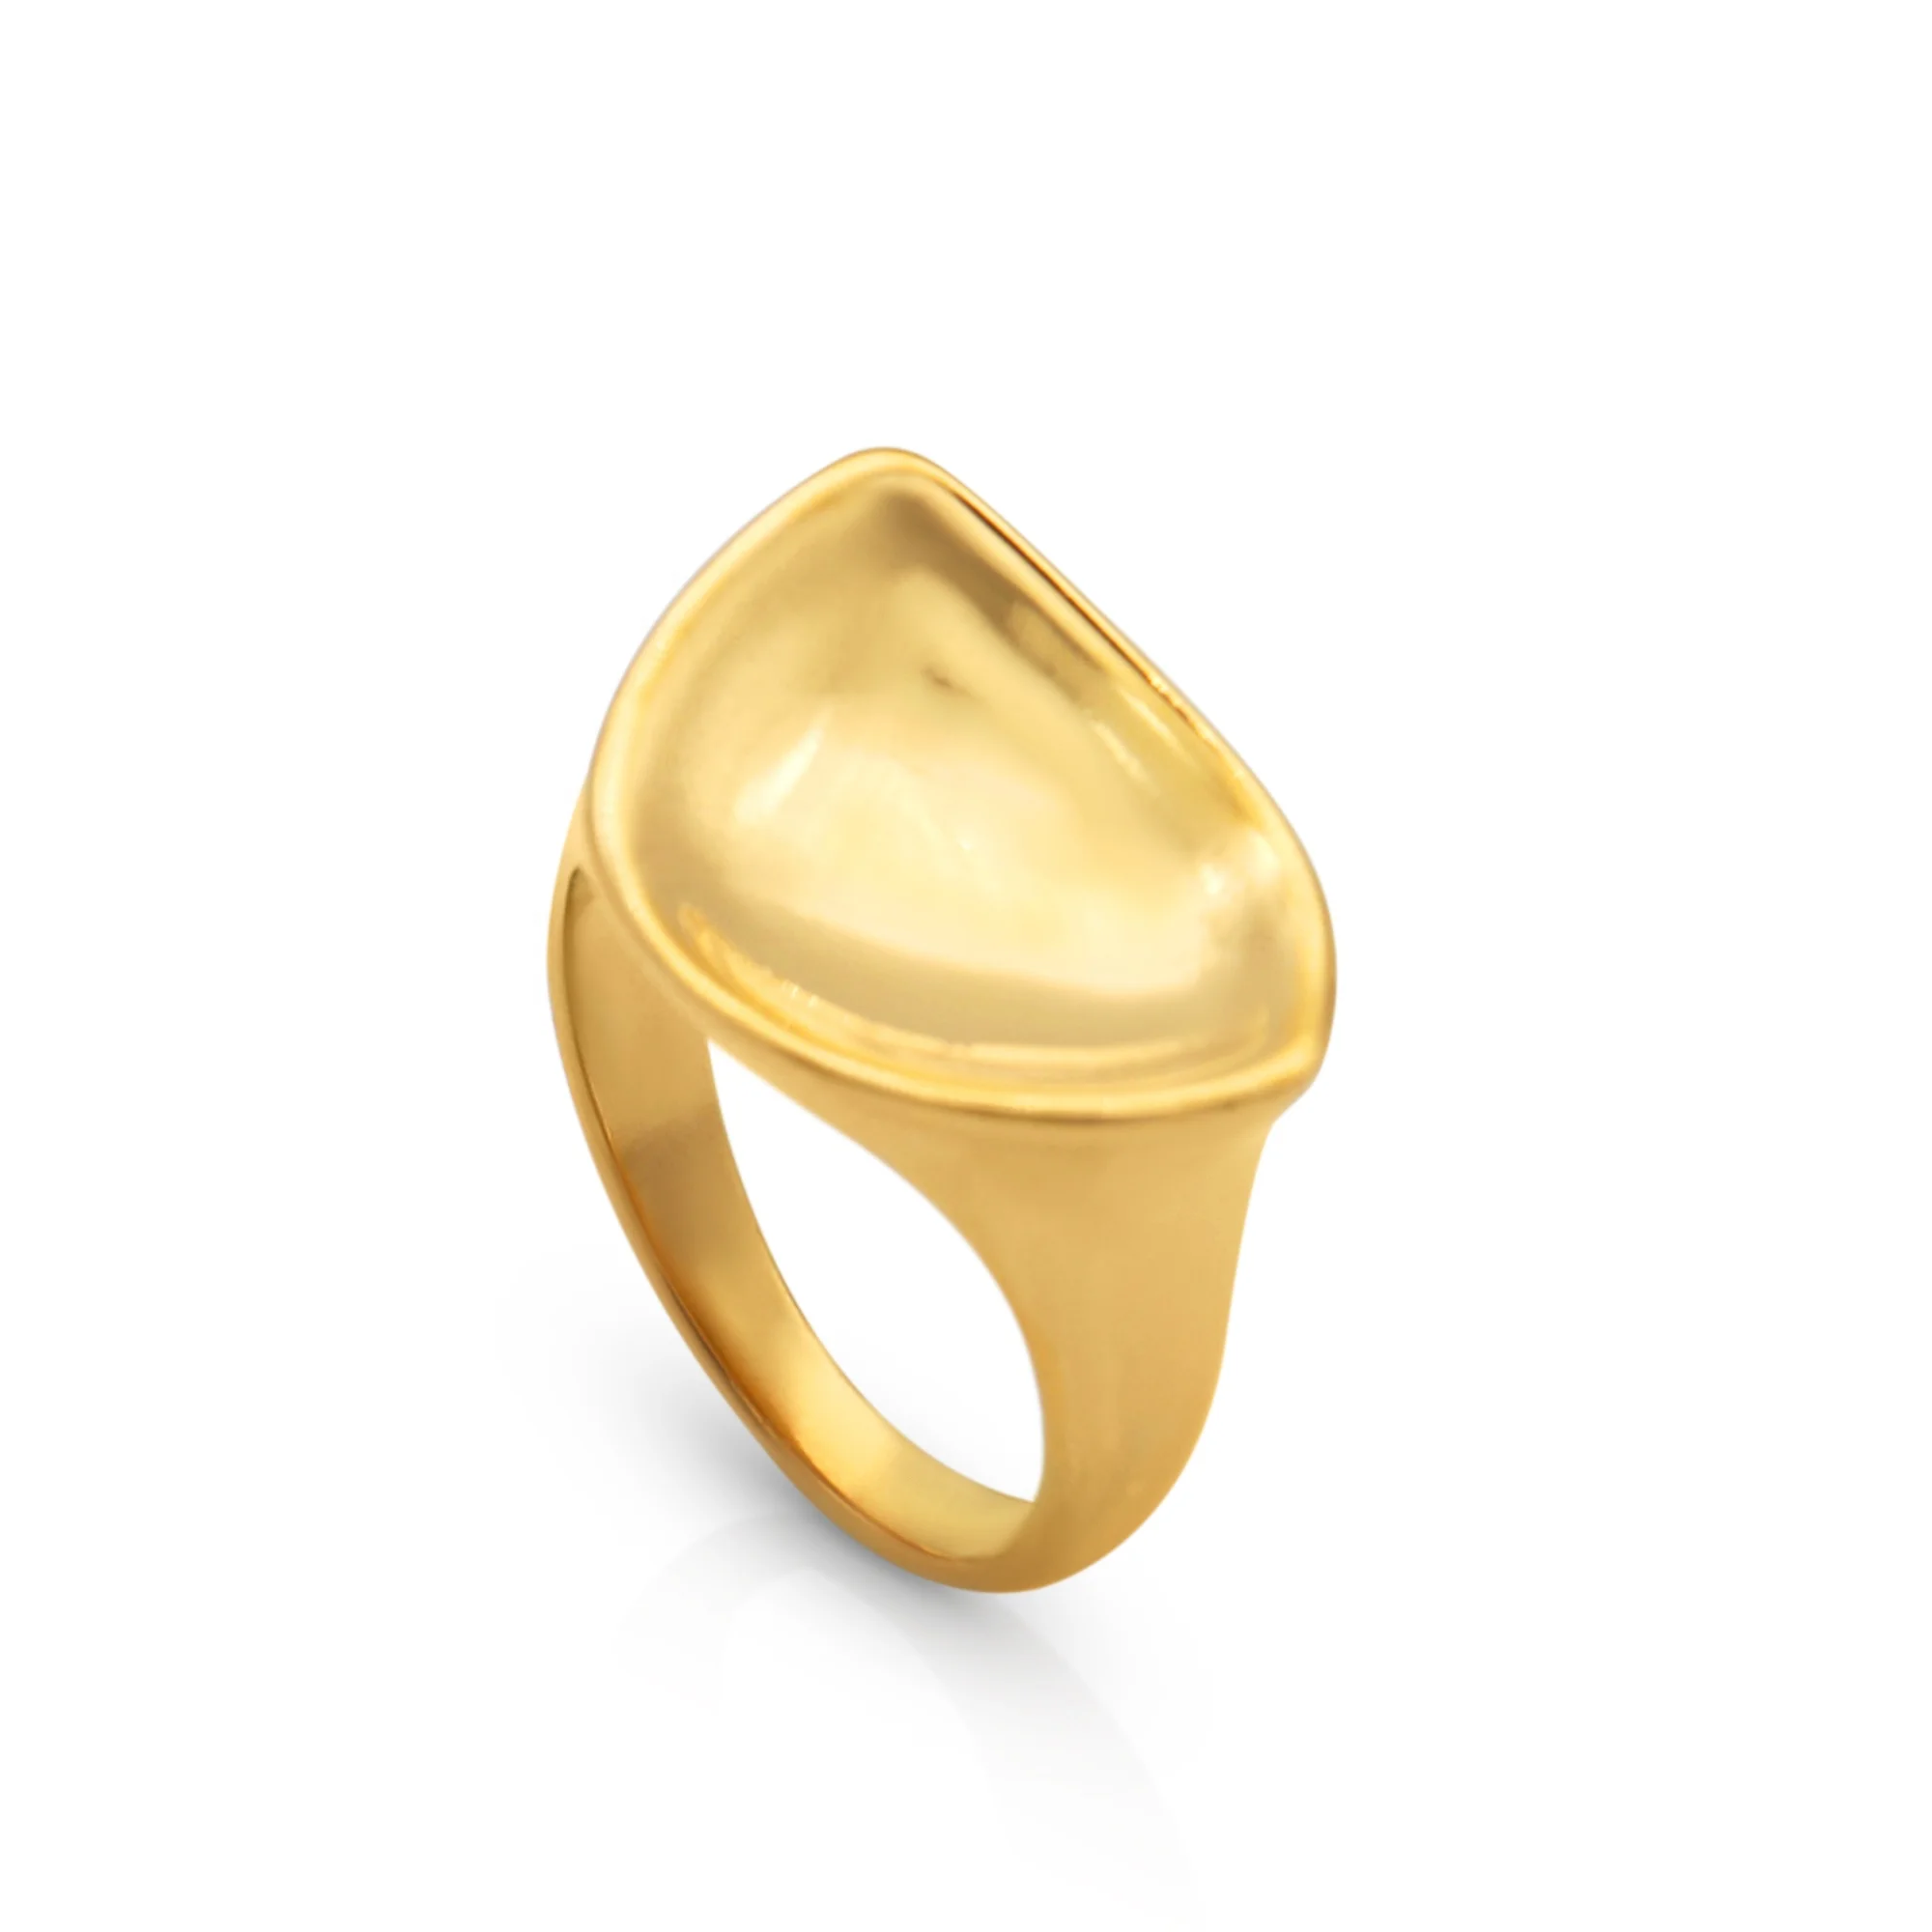 

Chris April fashion jewelry in stock PVD gold plated 316L stainless steel Non-tarnish organic shape Signet ring